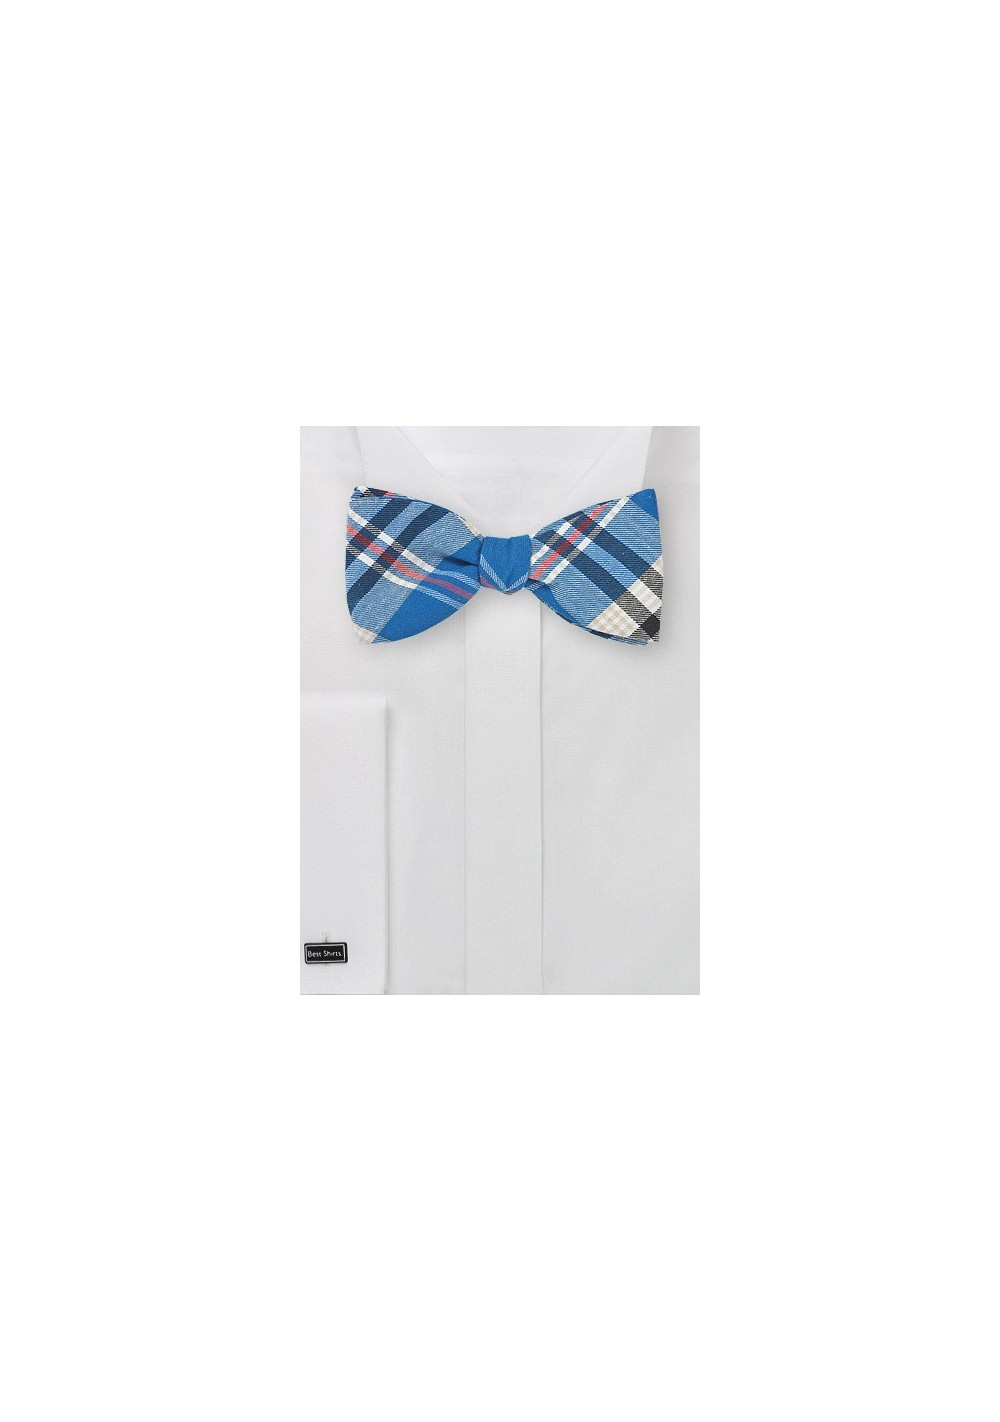 Madras Bow Tie in Royal Blue